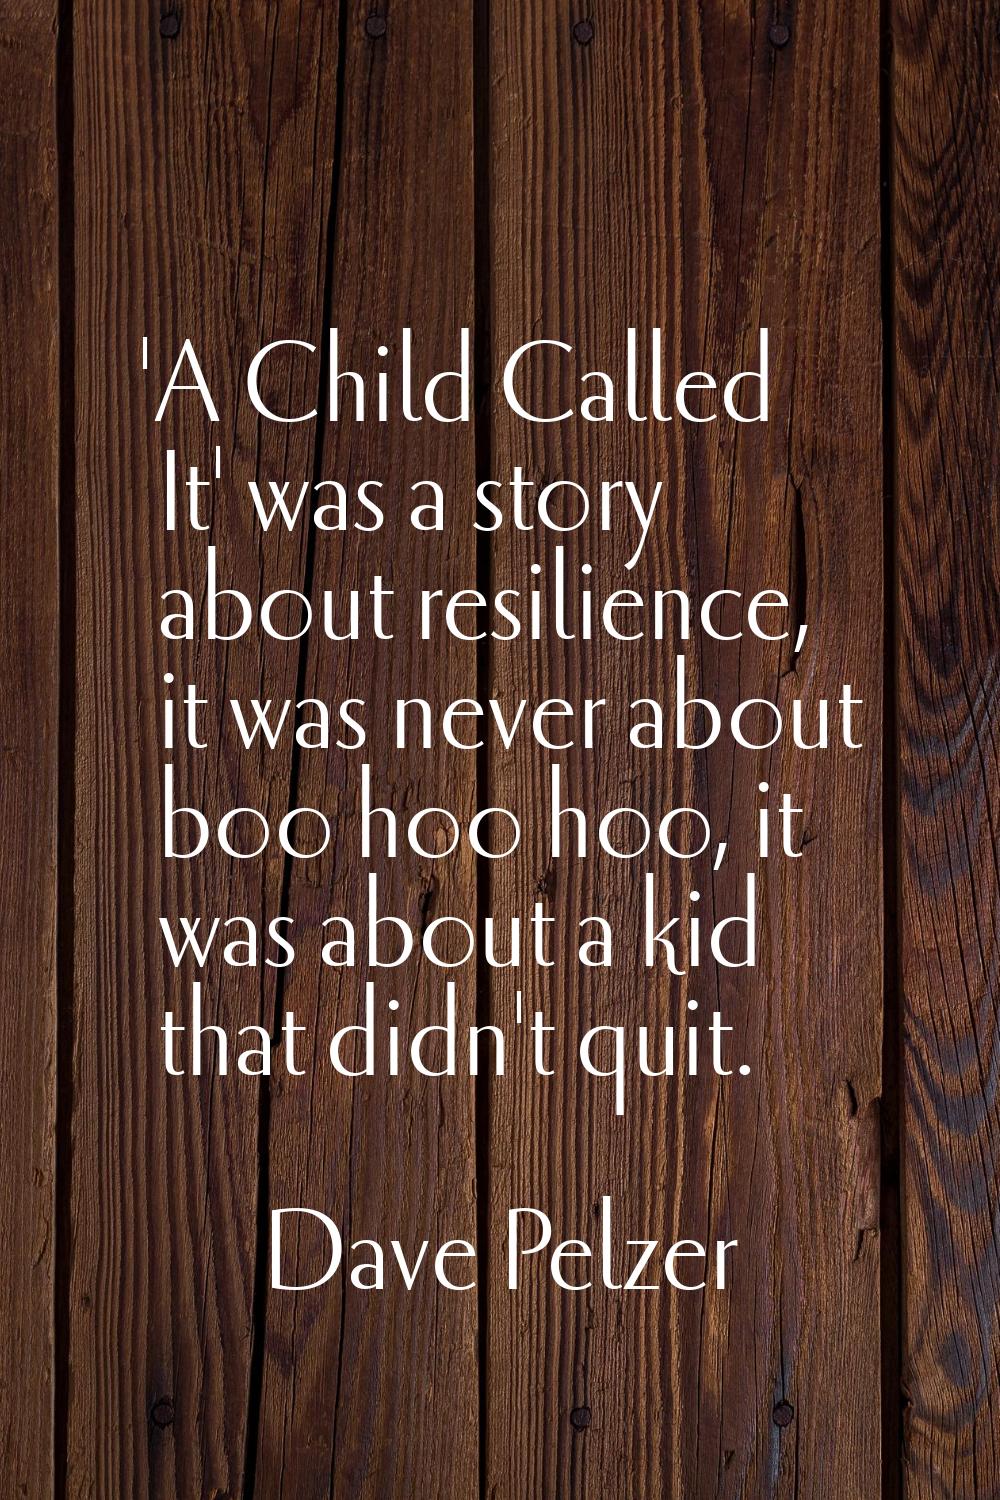 'A Child Called It' was a story about resilience, it was never about boo hoo hoo, it was about a ki